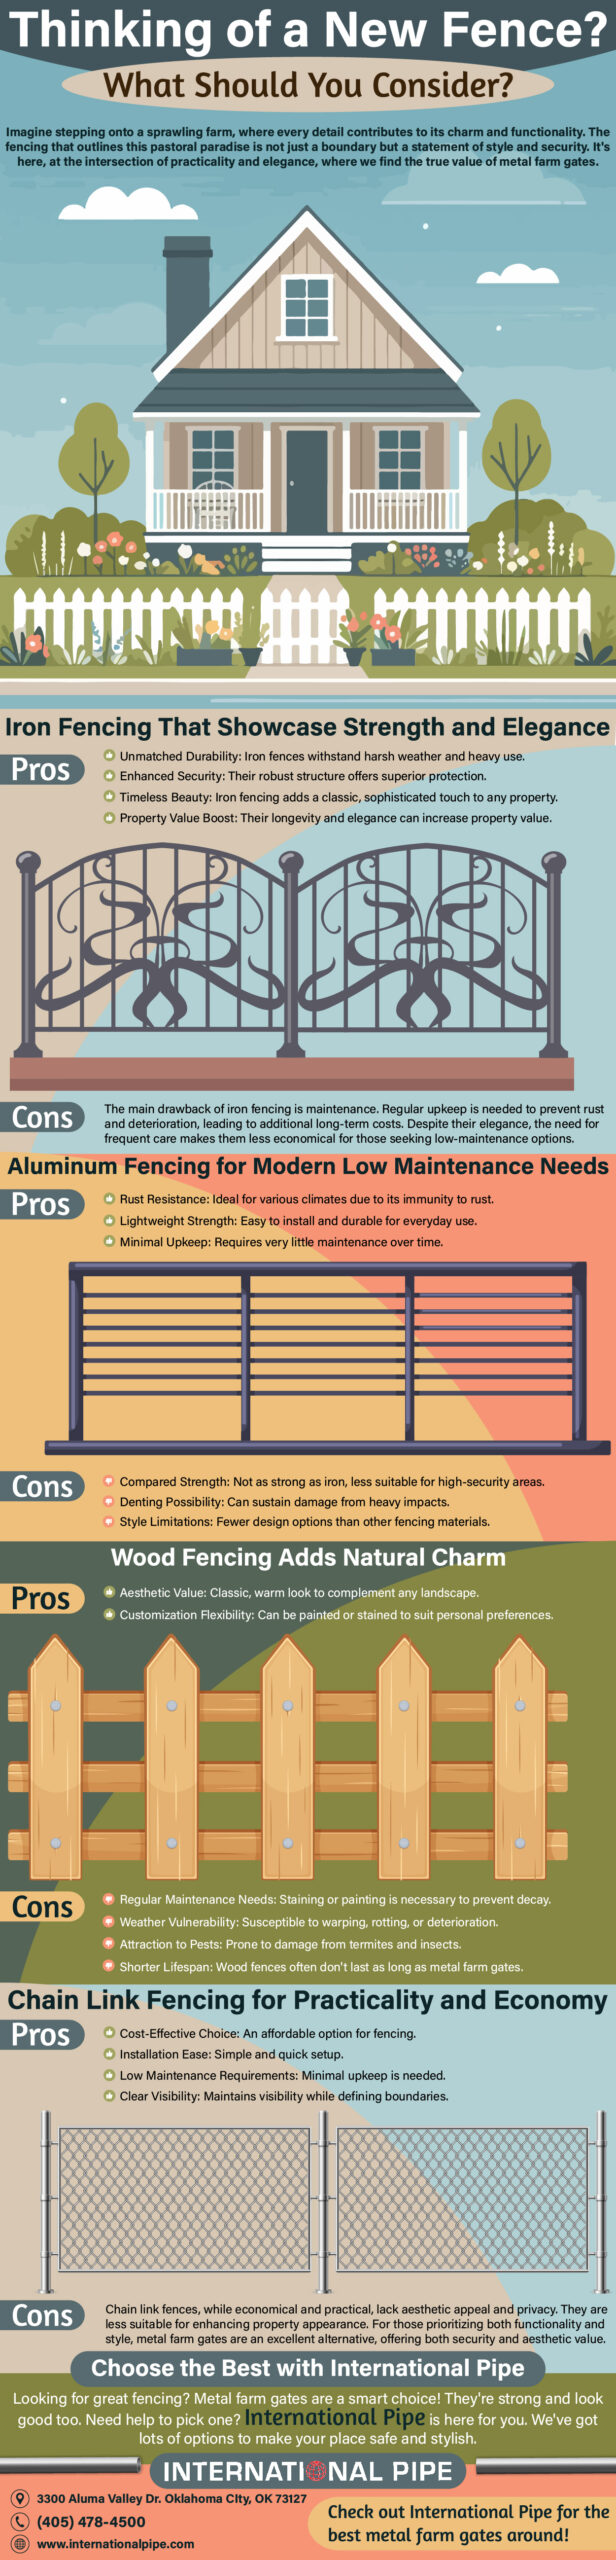 Thinking a New Fence What Should You Consider